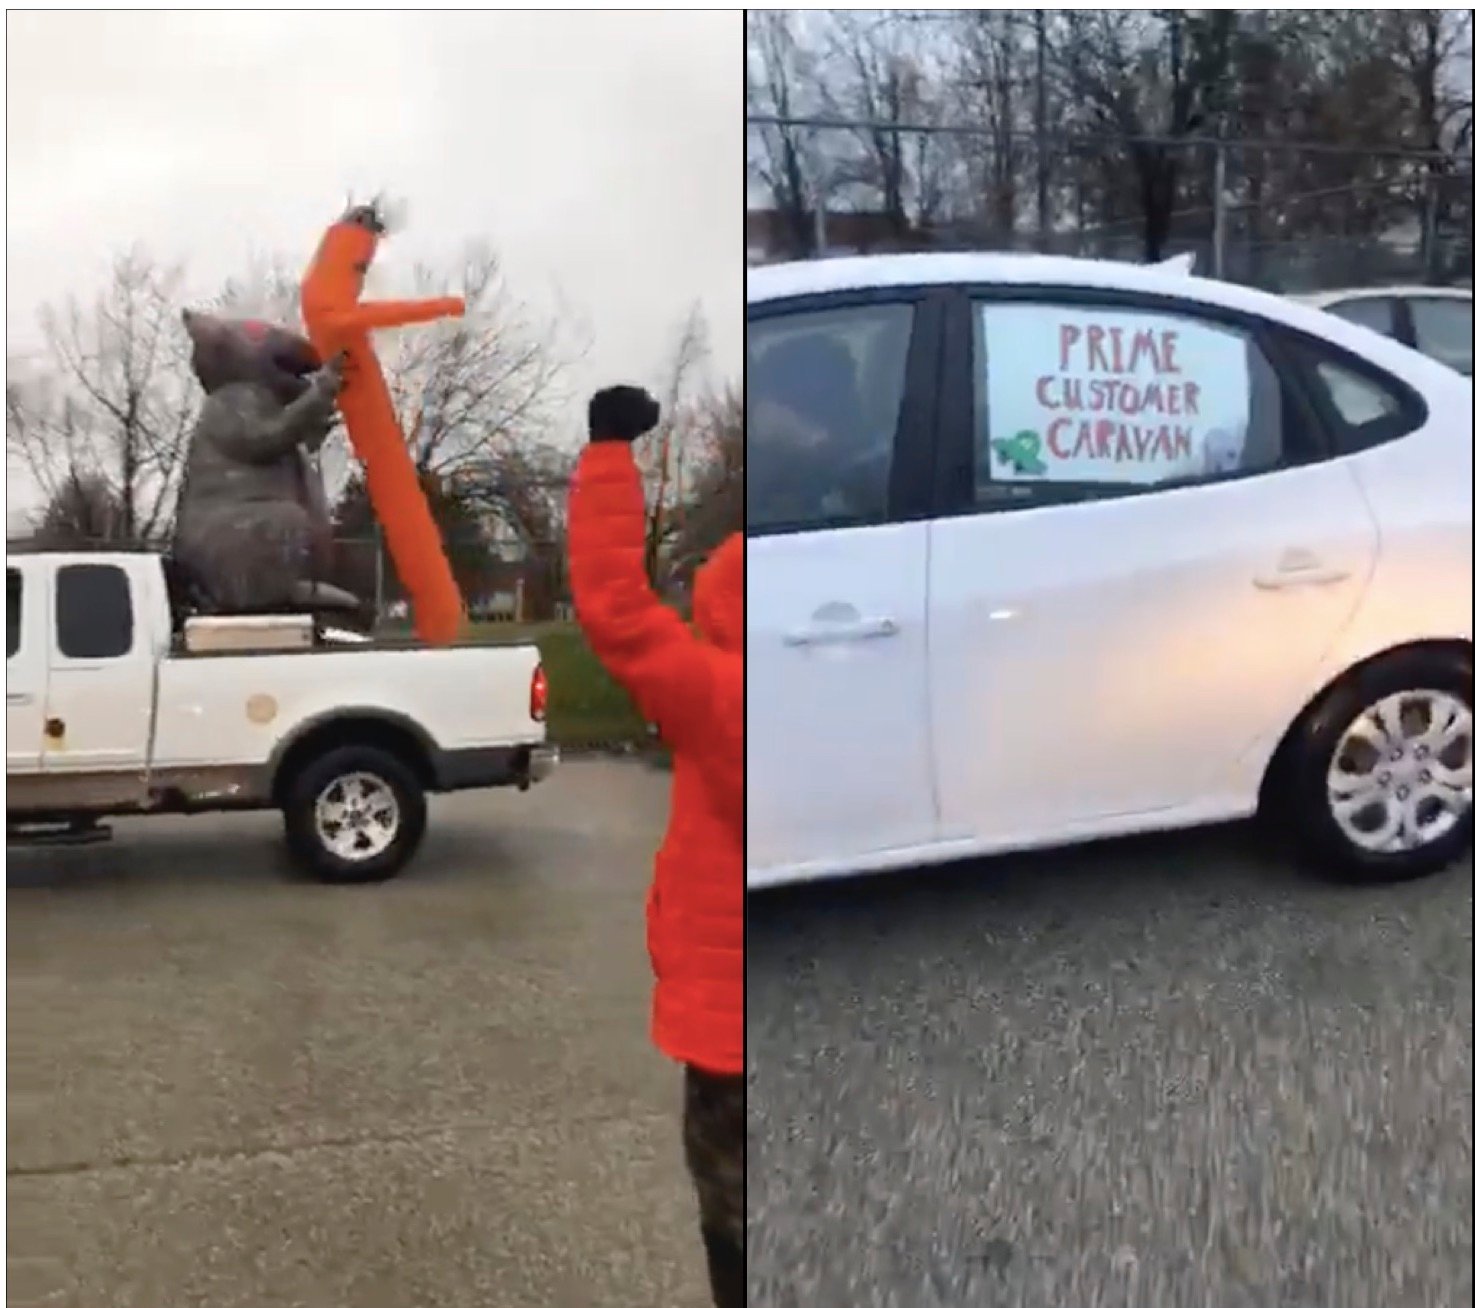 Left side: in the foreground, a person in a red jacket, from the back, fist raised saluting an inflatable rat in the back of a pickup. Right, a car with "prime customer caravan" sign in the window.